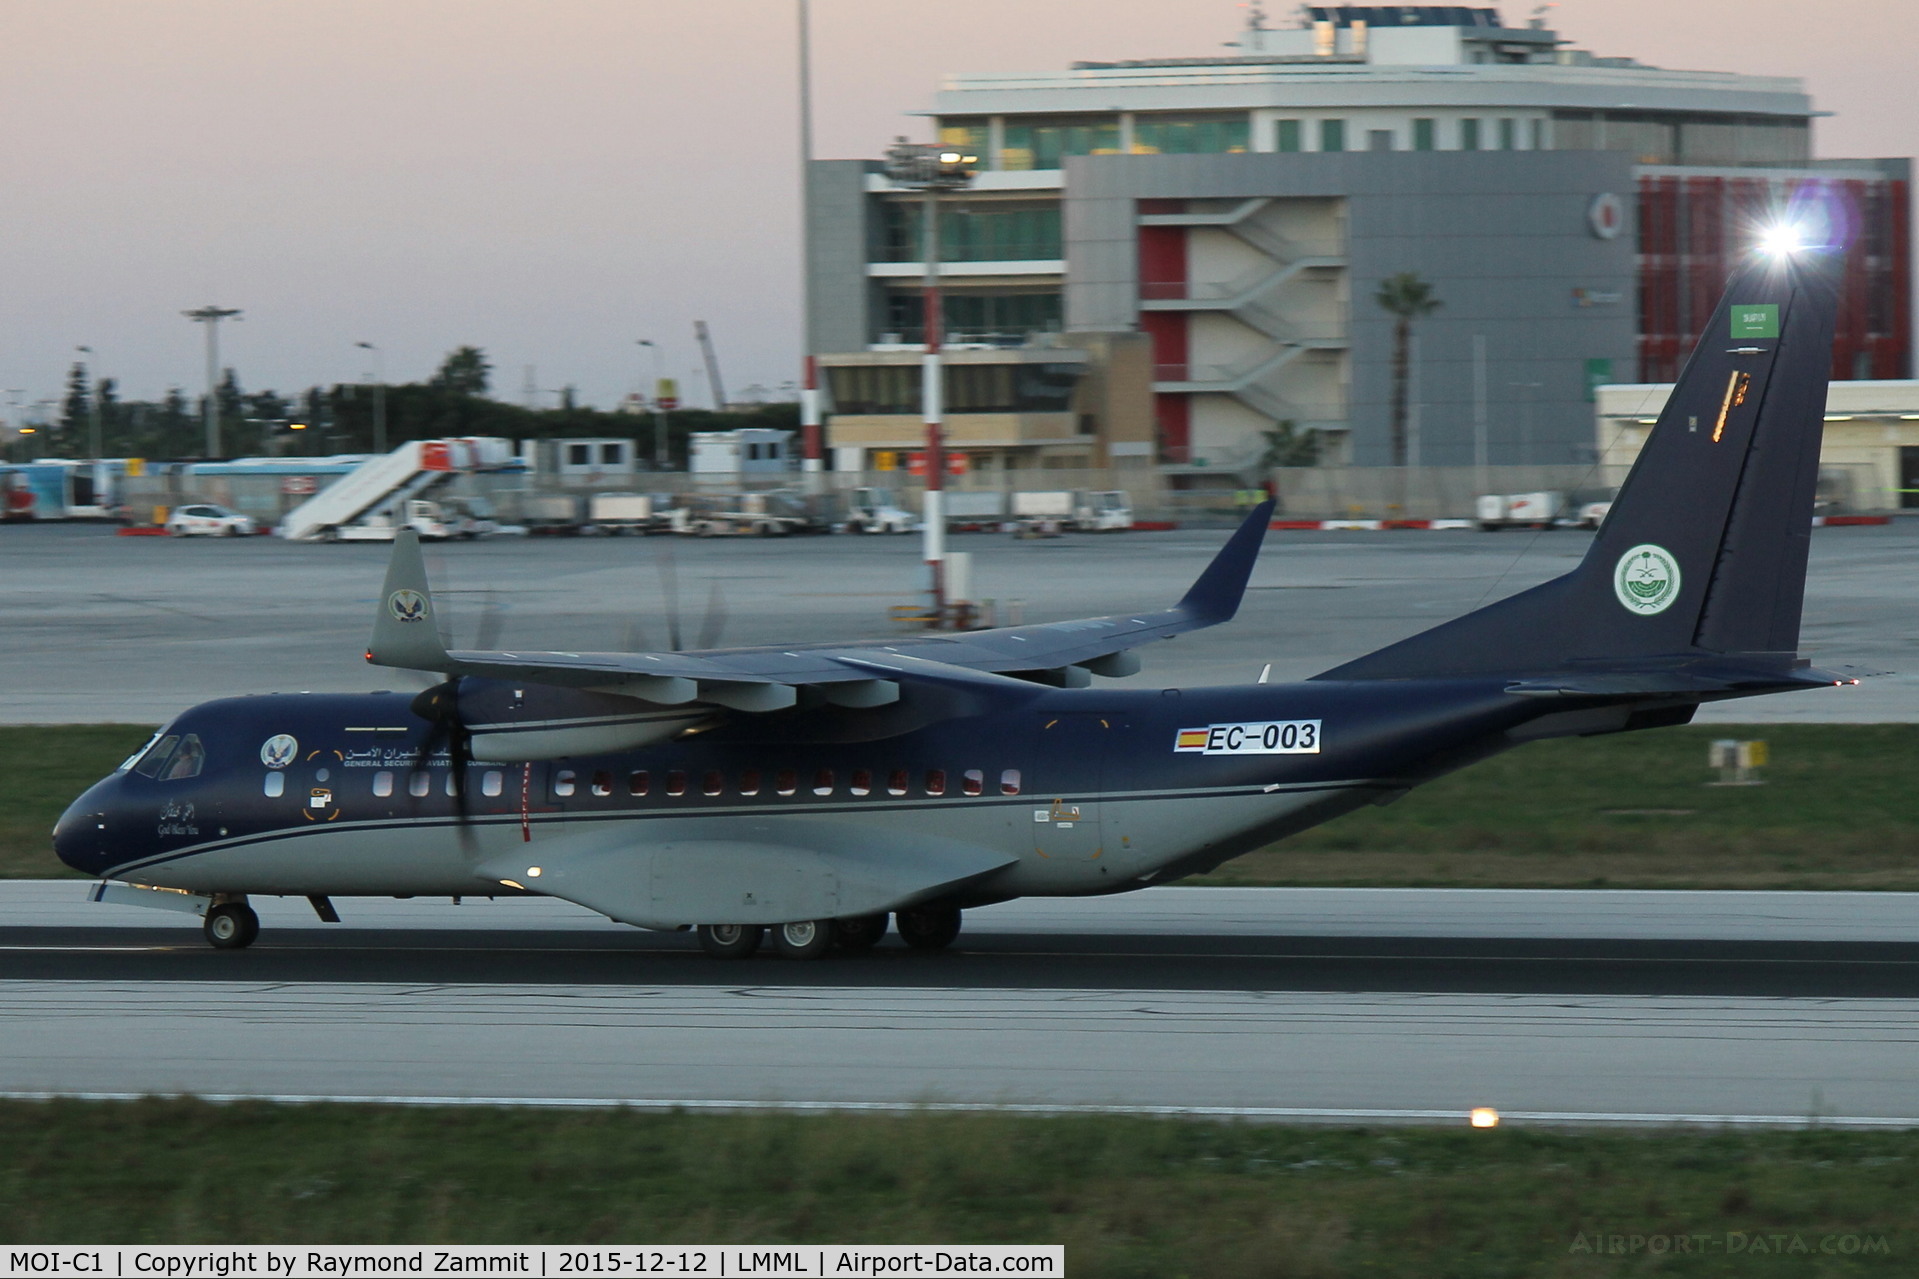 MOI-C1, 2015 CASA C-295W C/N 143, Casa-295 MOI-C1 Royal Saudi Air Force (Ministry of Interior) on delivery flight. Seen here landing in Malta for a night and fuel stop.